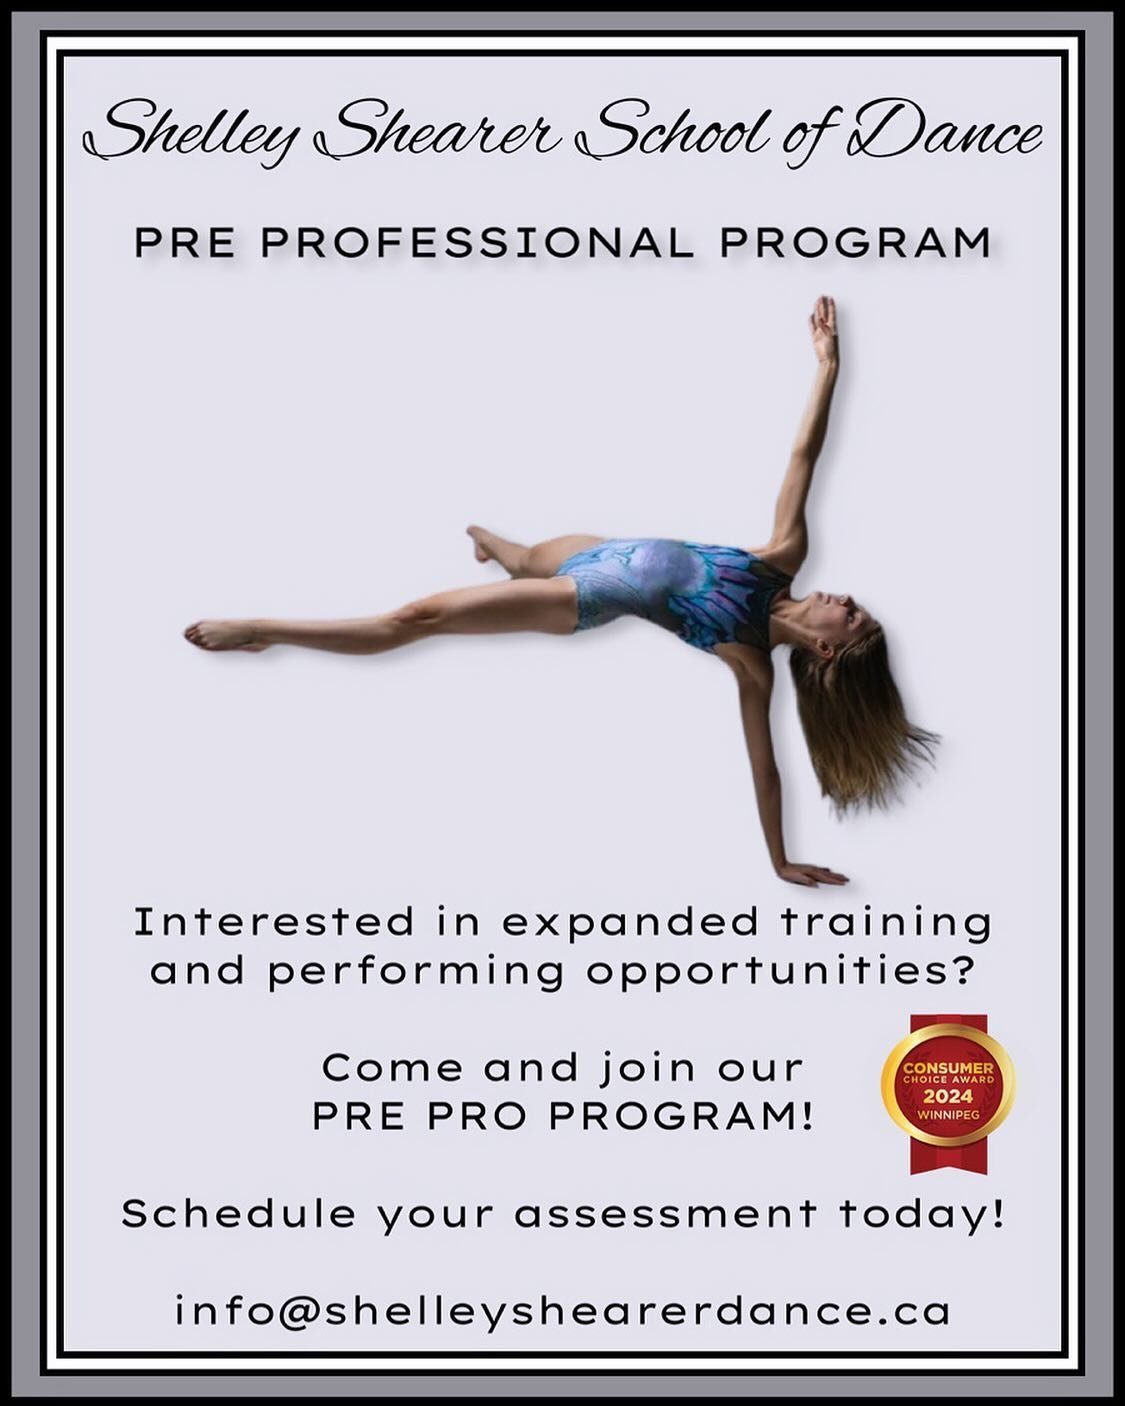 Come and join our SSSOD Pre Professional team! 🩶

Designed for the student striving towards a professional dance career or just interested in expanded dance opportunities. 

The SSSOD Pre Professional Program focuses on additional choreography, trai